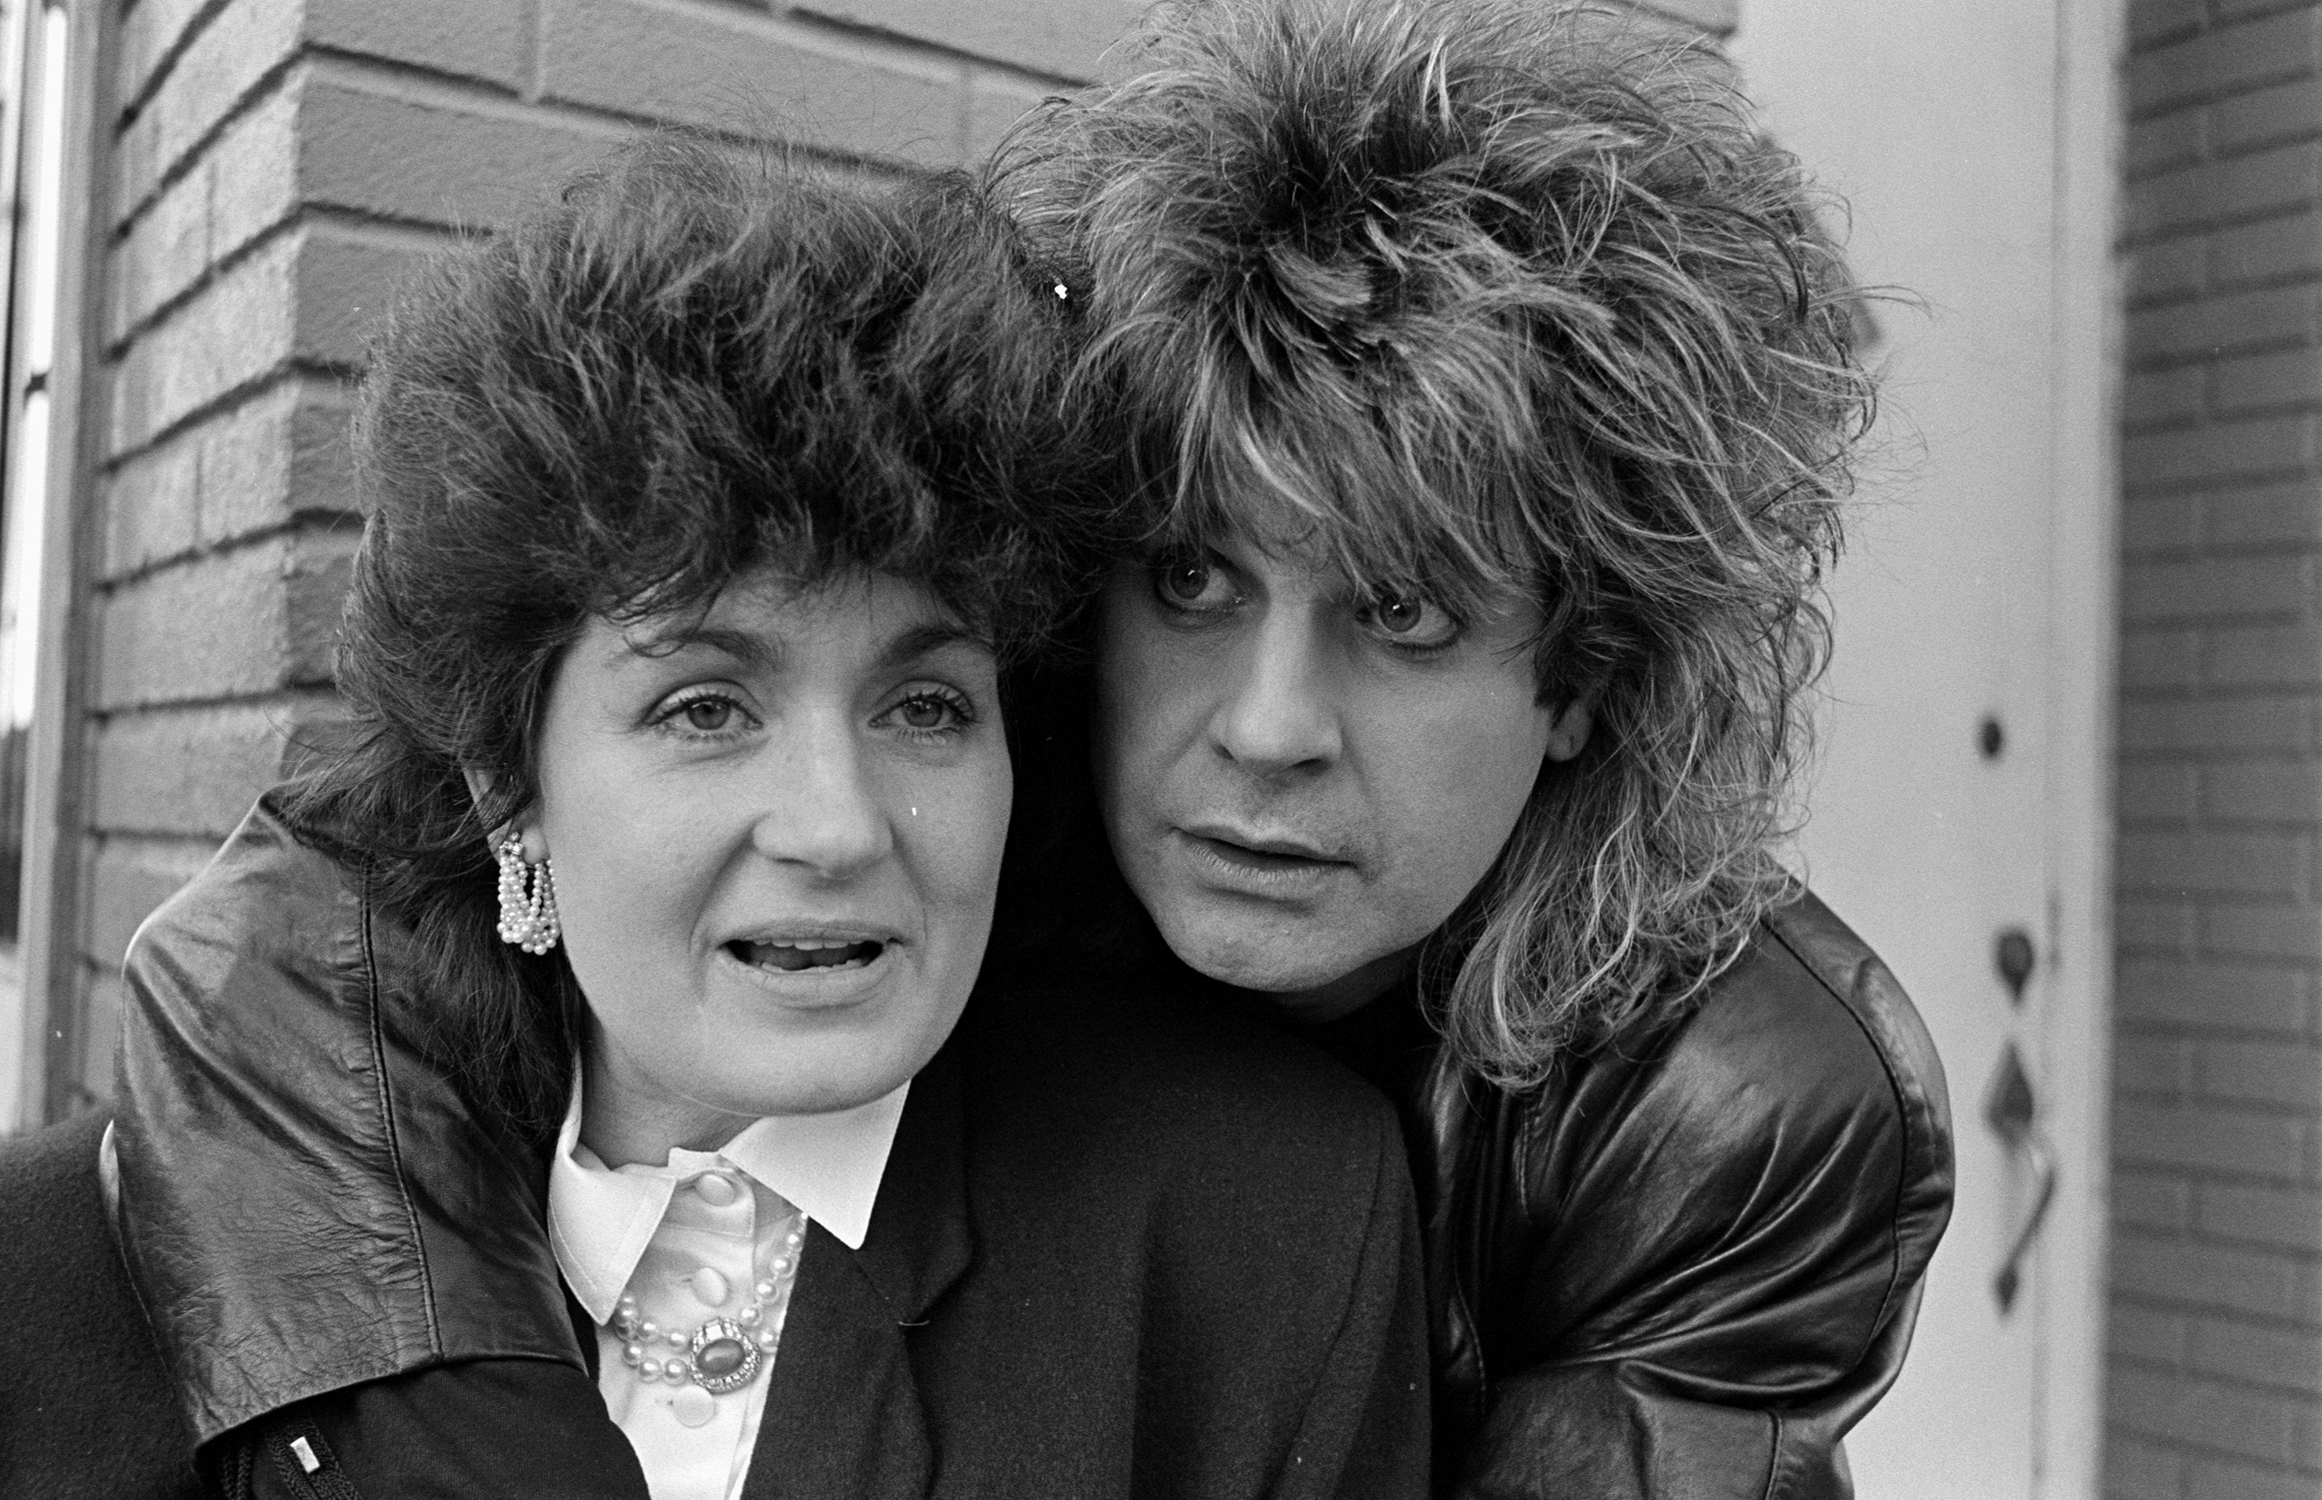 <p>Here's<span> what a pre-plastic surgery <a href="https://www.wonderwall.com/celebrity/profiles/overview/sharon-osbourne-1449.article">Sharon Osbourne</a> looked like back in 1987 after five years of marriage to rocker Ozzy Osbourne.</span> </p>